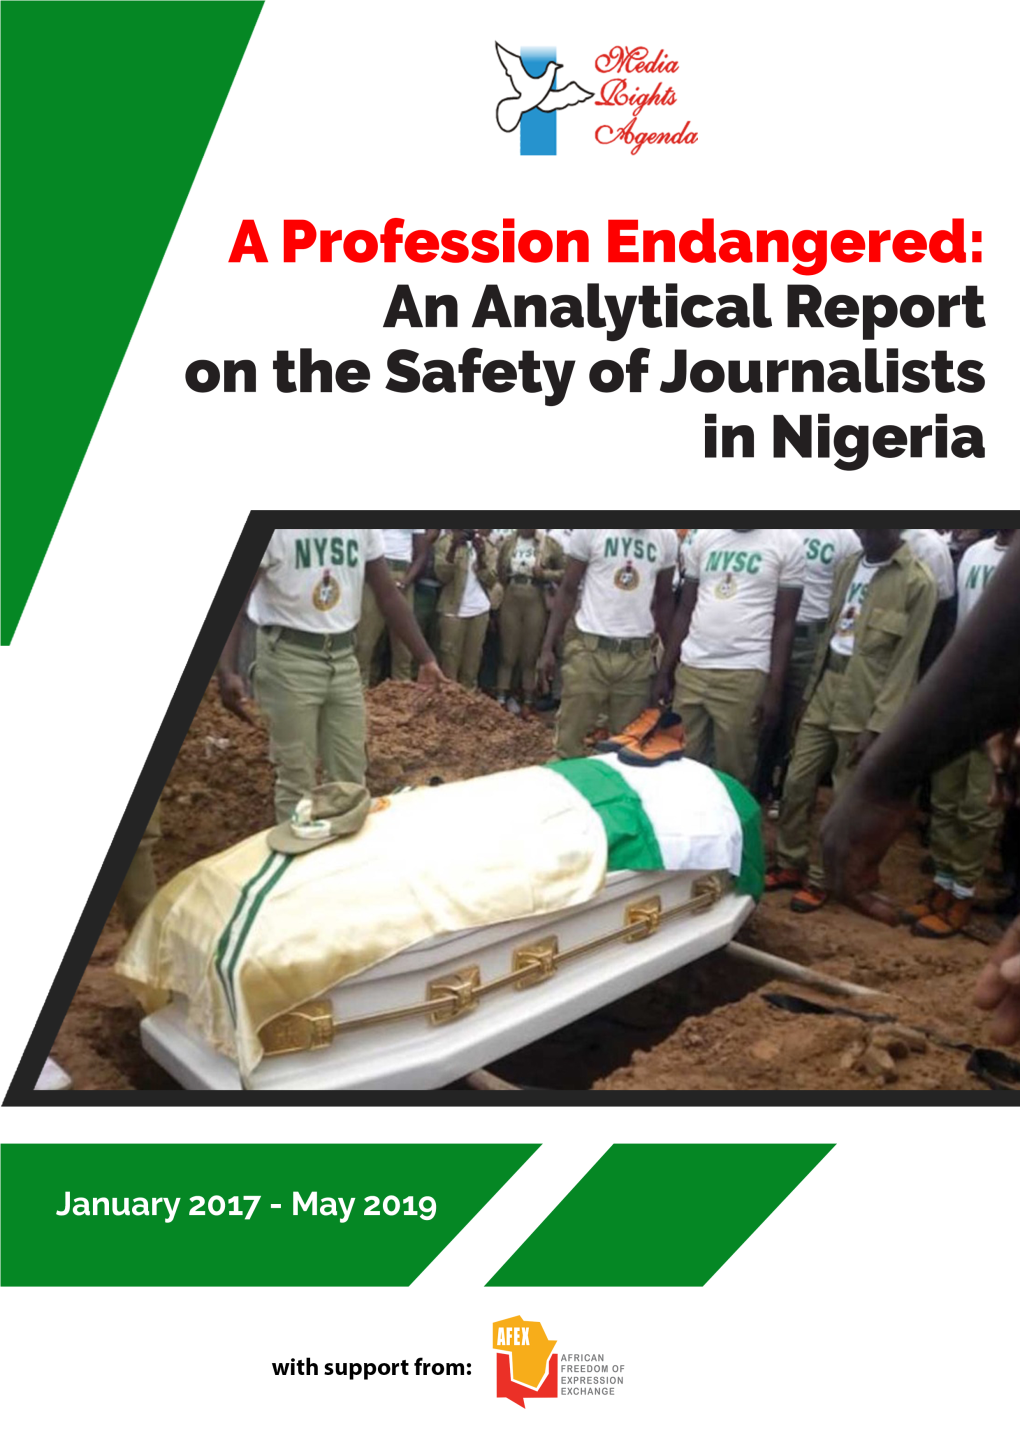 Analytical Report on the Safety of Journalists in Nigeria